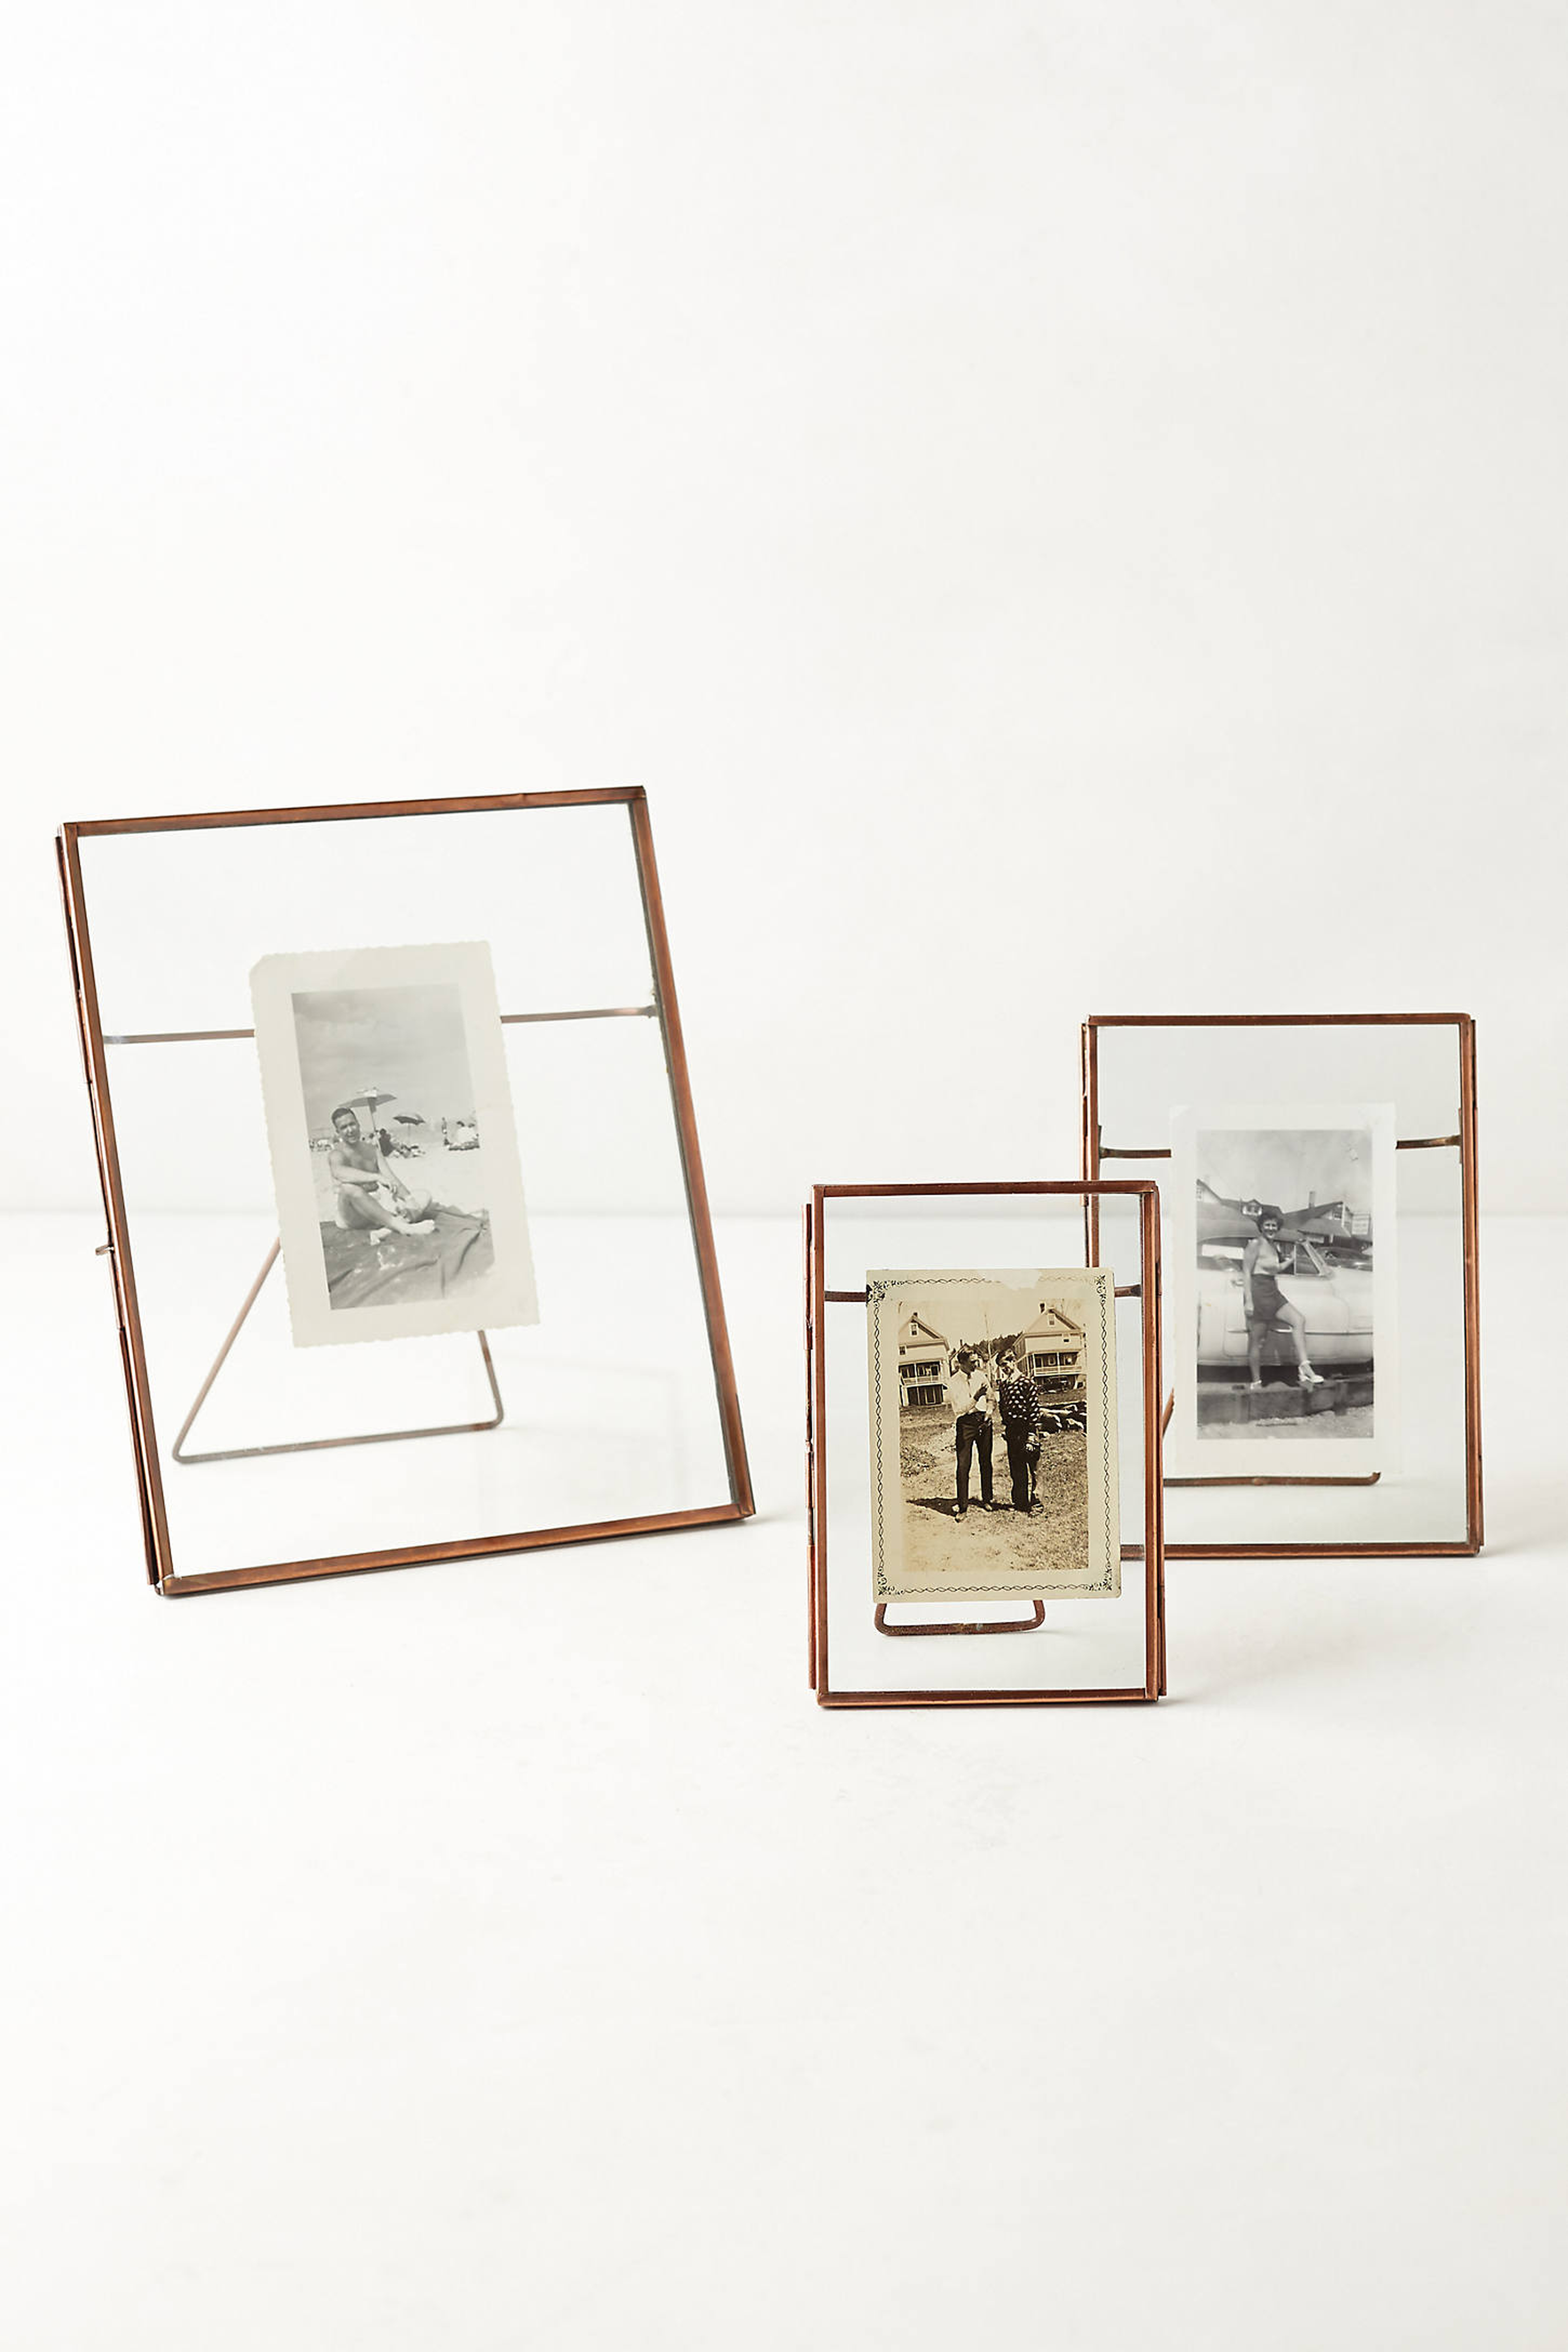 Pressed Glass Photo Frame By Anthropologie in Brown Size 5 X 7 - Anthropologie